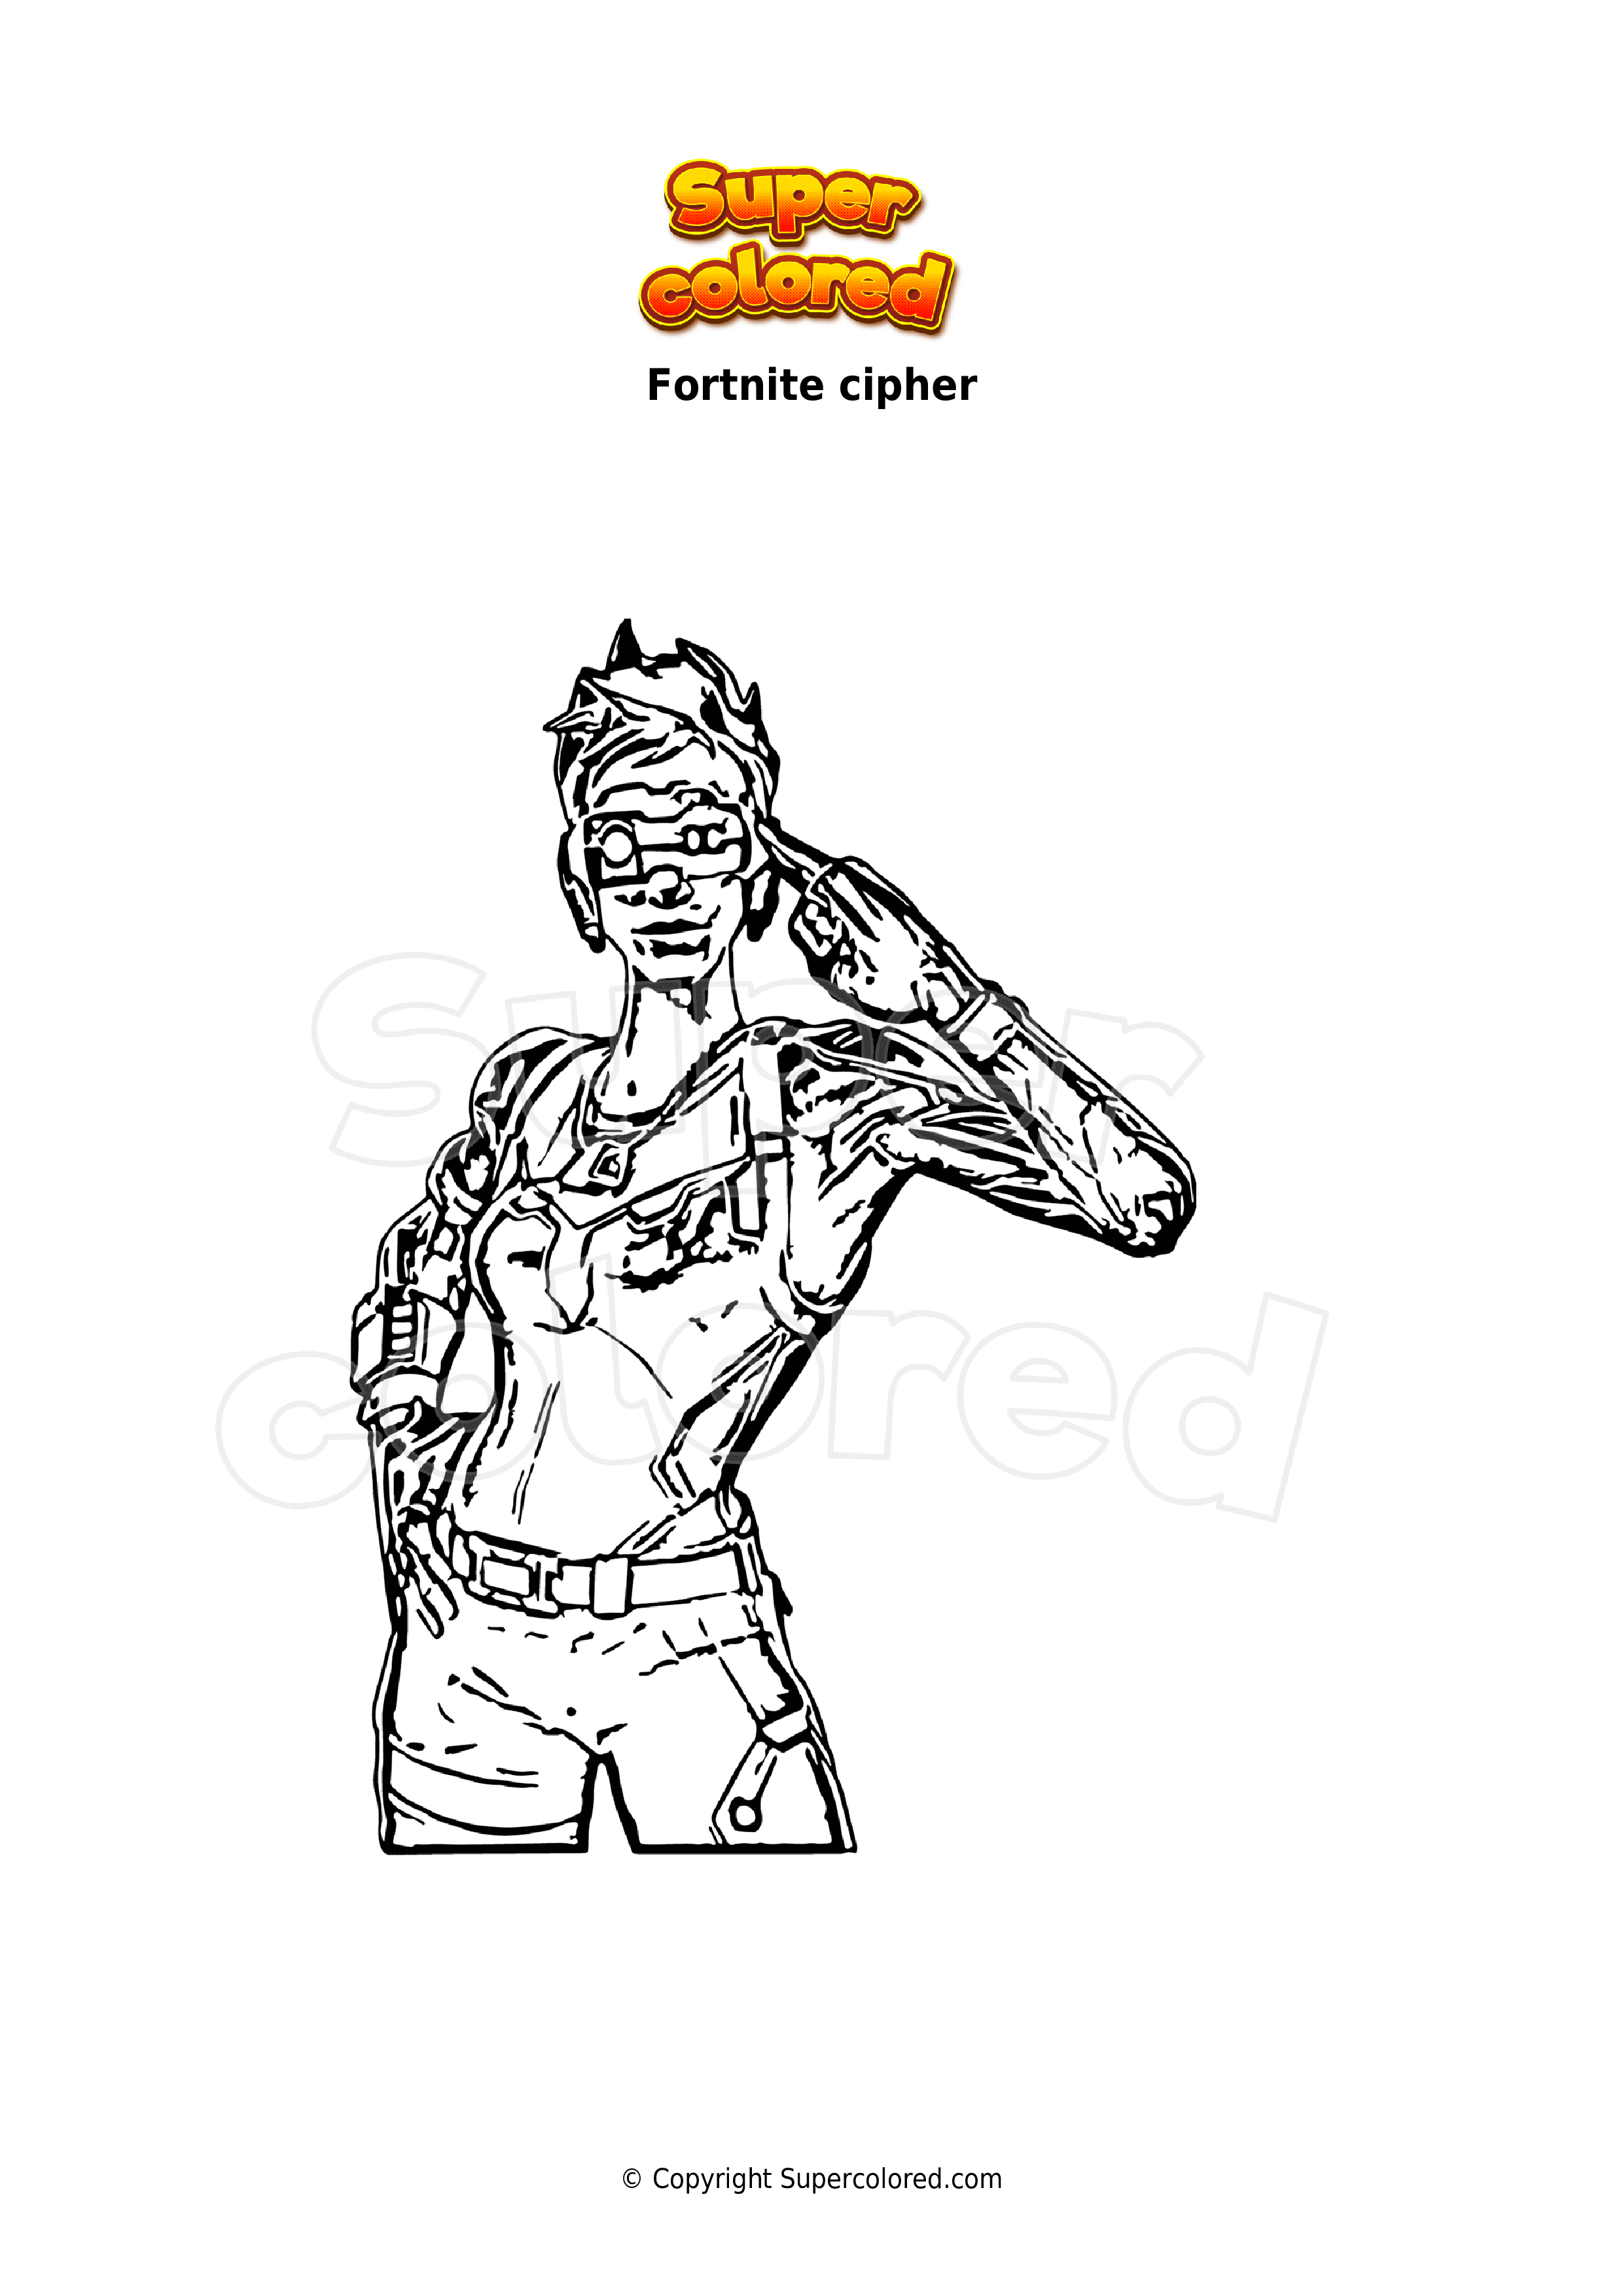 fortnite-character-fortnite-coloring-pages-easy-fortnite-coloring